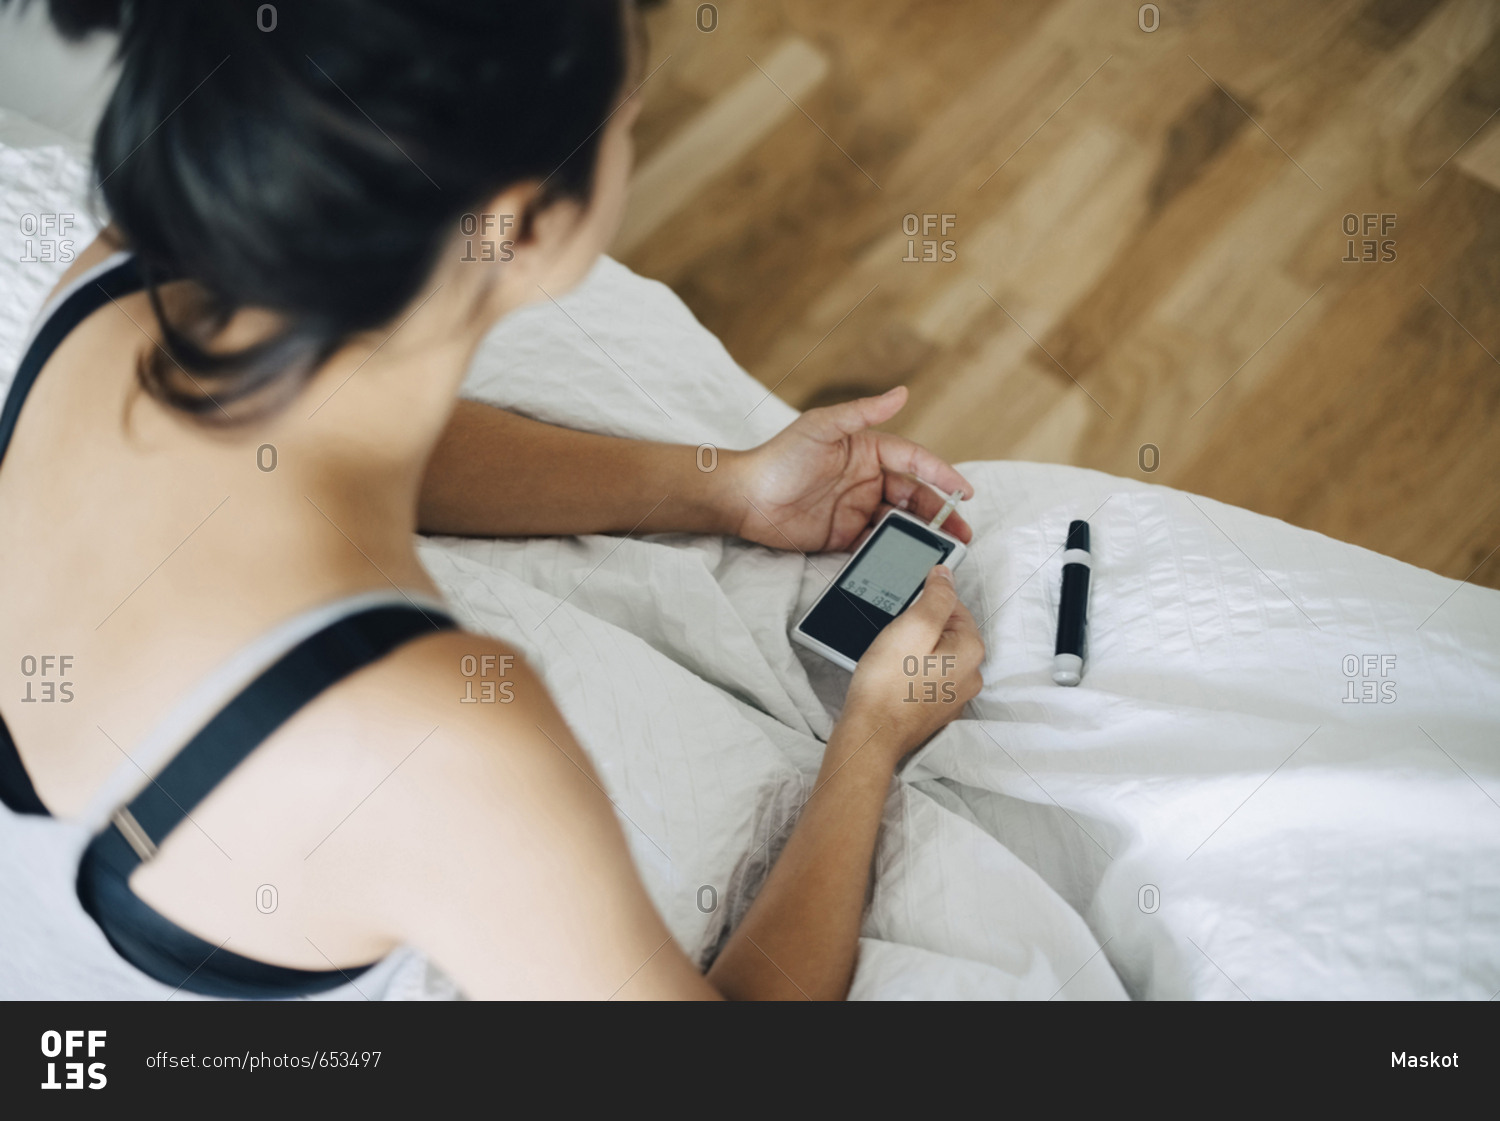 High angle view of woman checking blood sugar level while sitting on bed